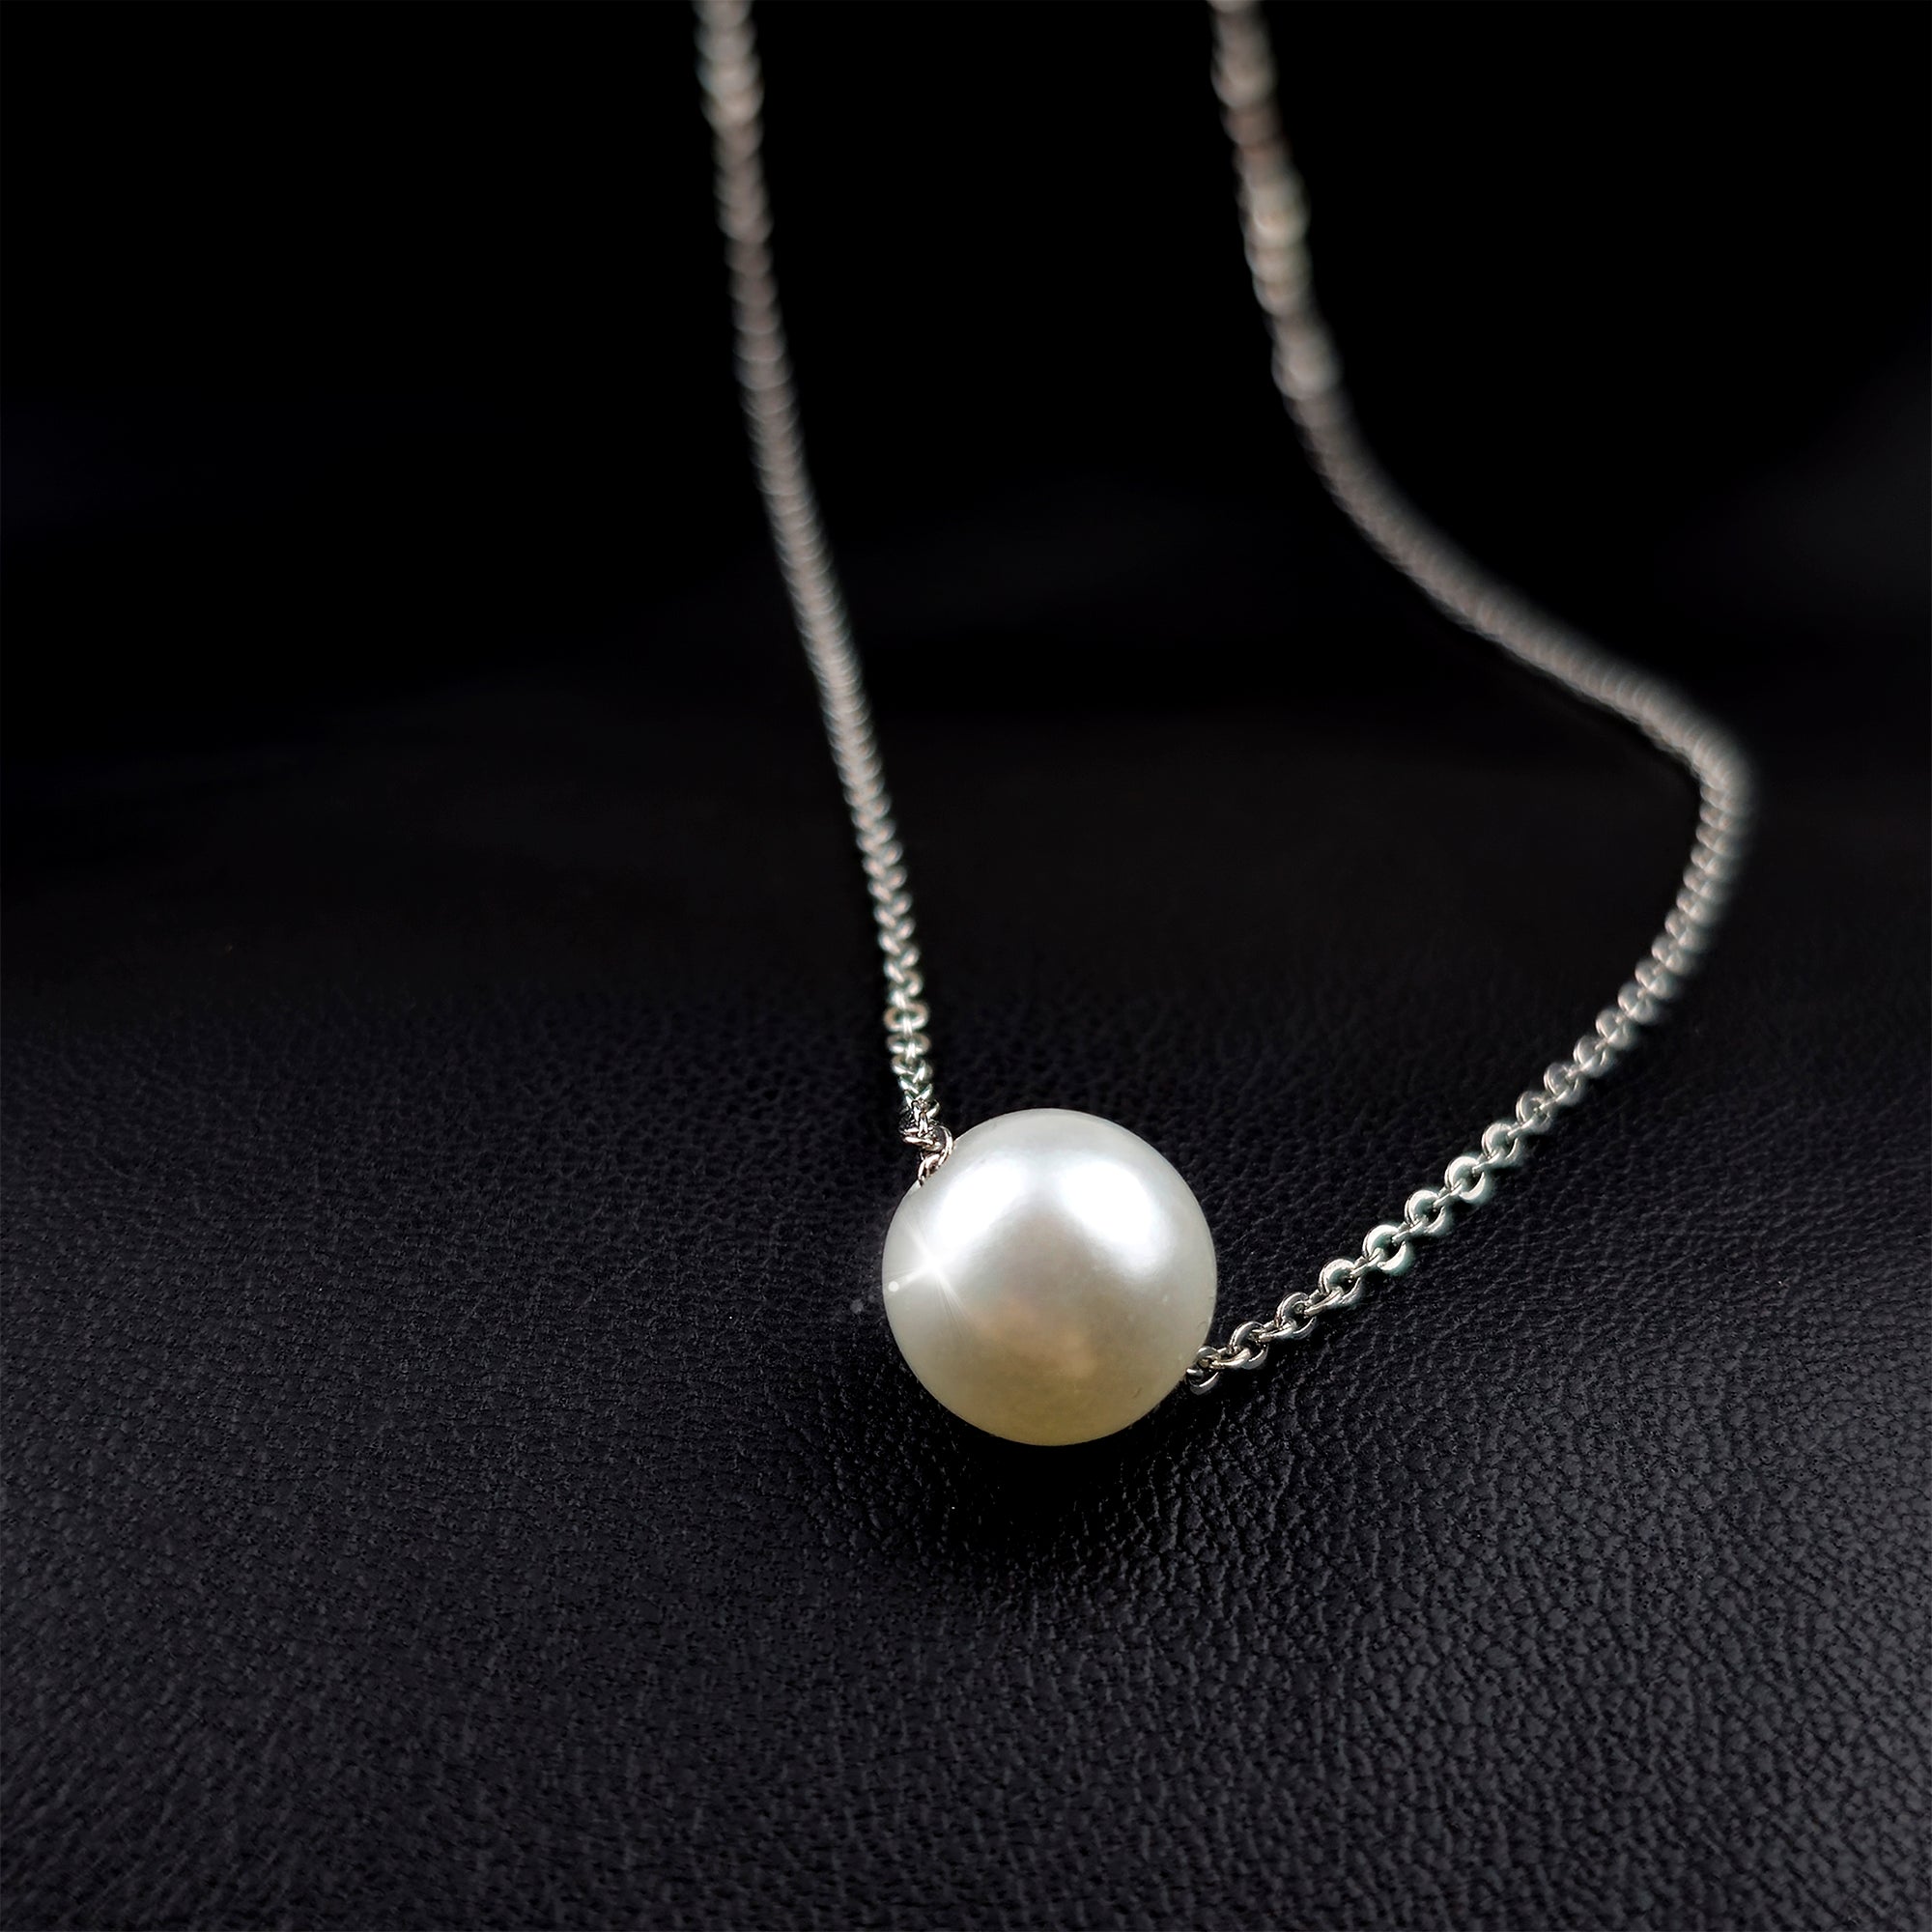 Pearl Necklace - 18 to 20 inch